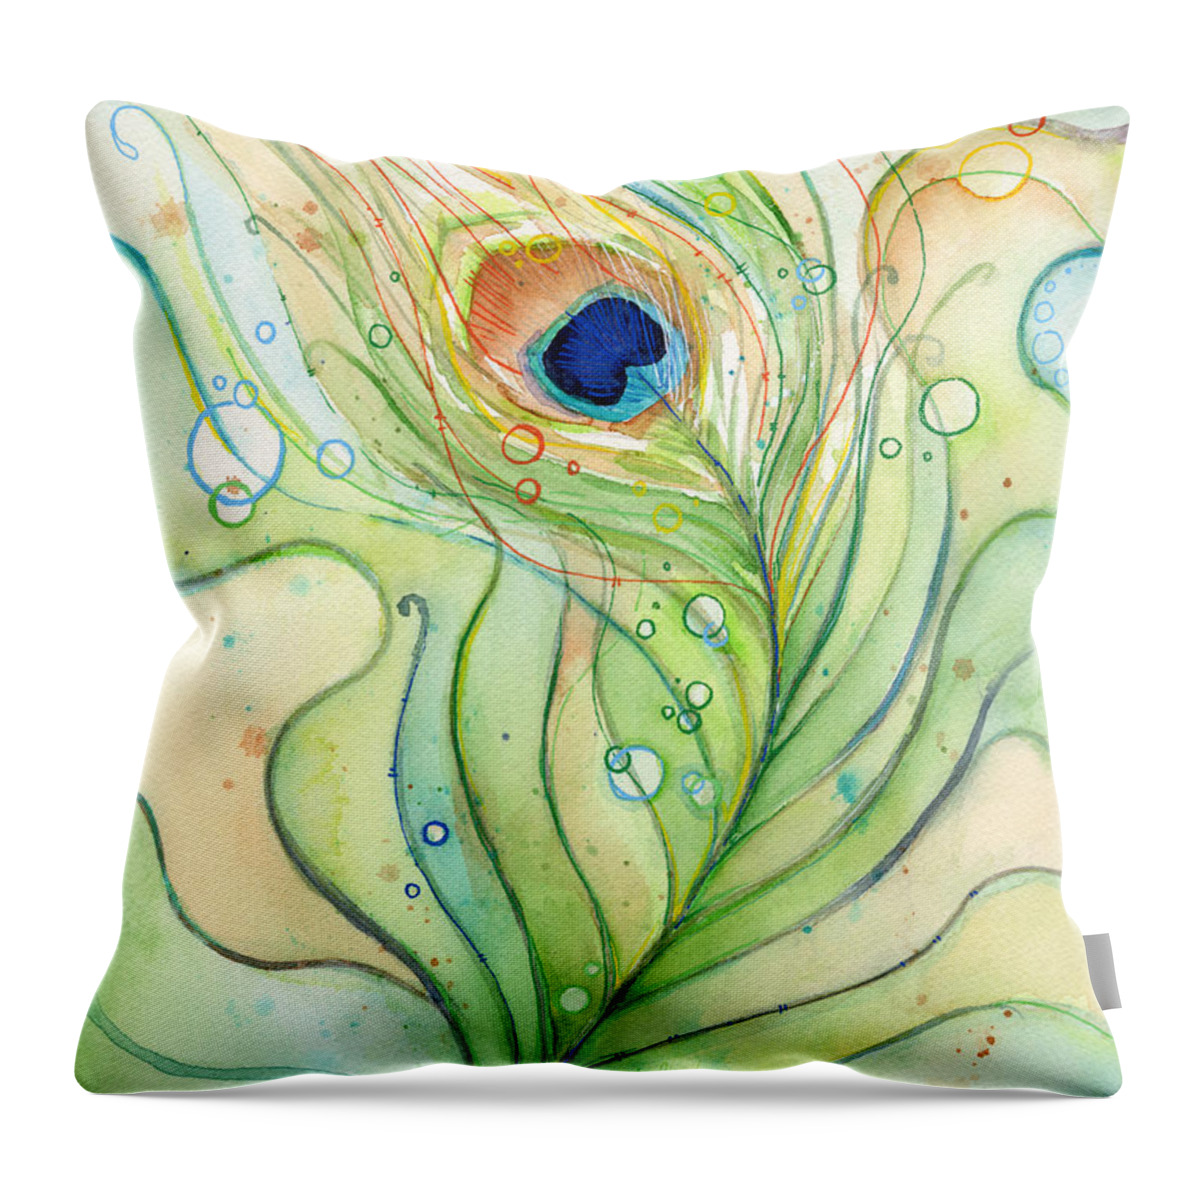 Peacock Throw Pillow featuring the painting Peacock Feather Watercolor by Olga Shvartsur